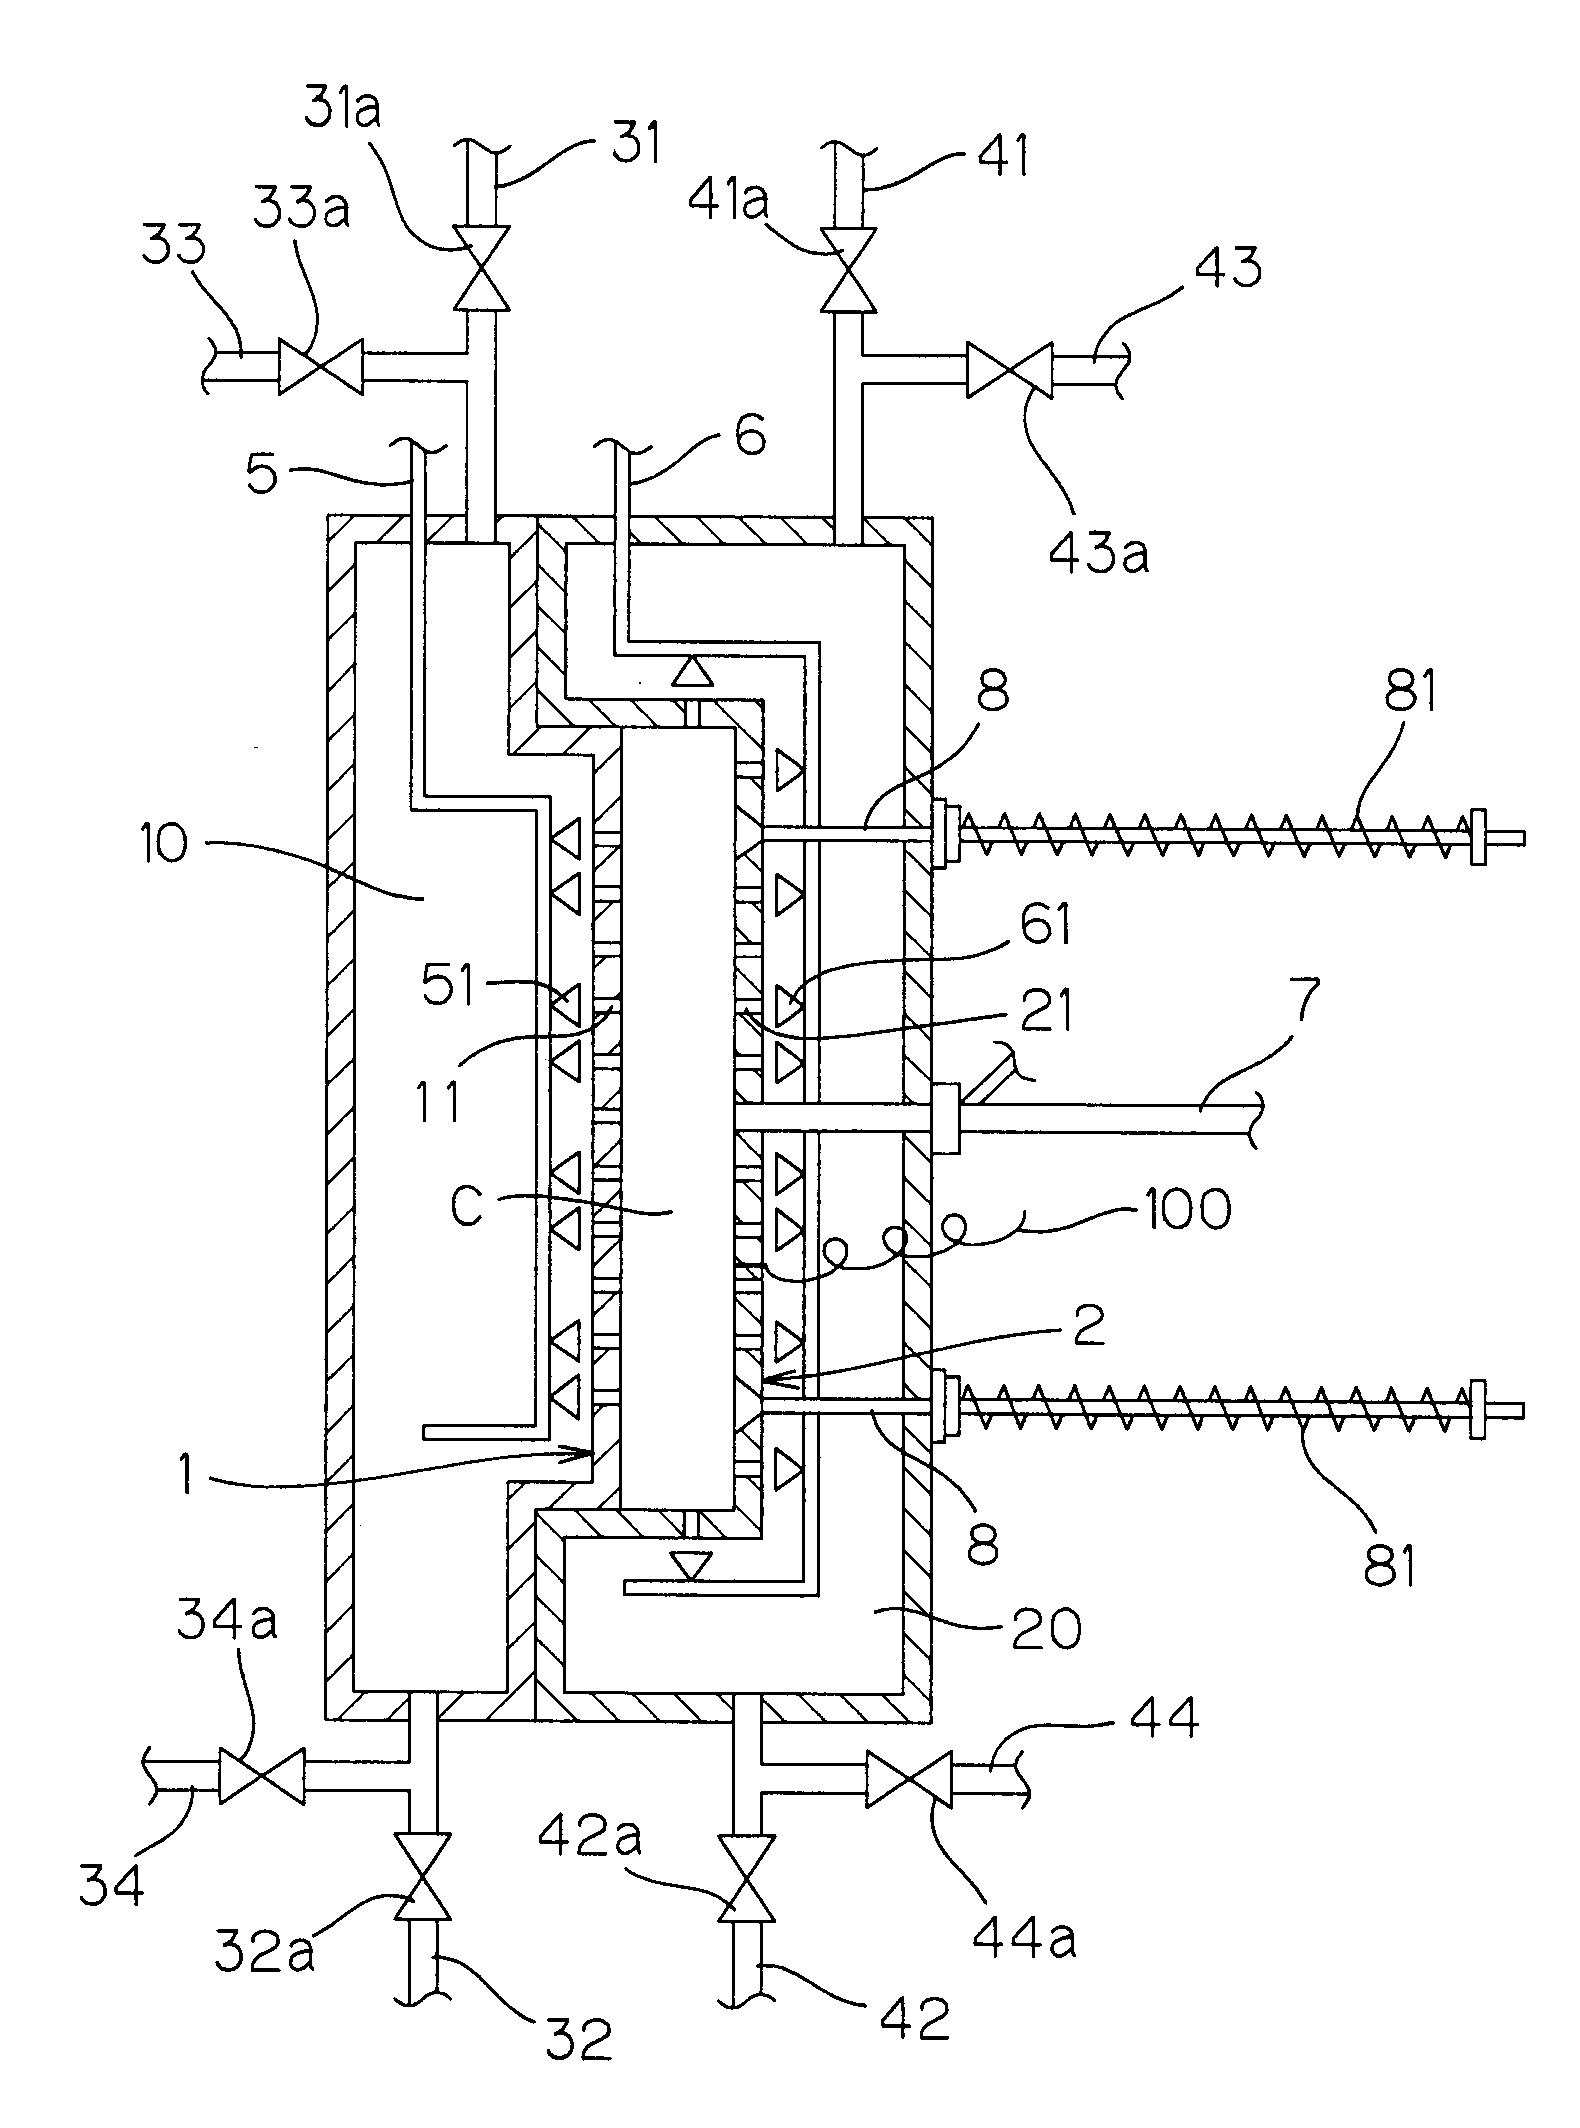 Method for producing foamed-in-mold product of aromatic polyester based resin